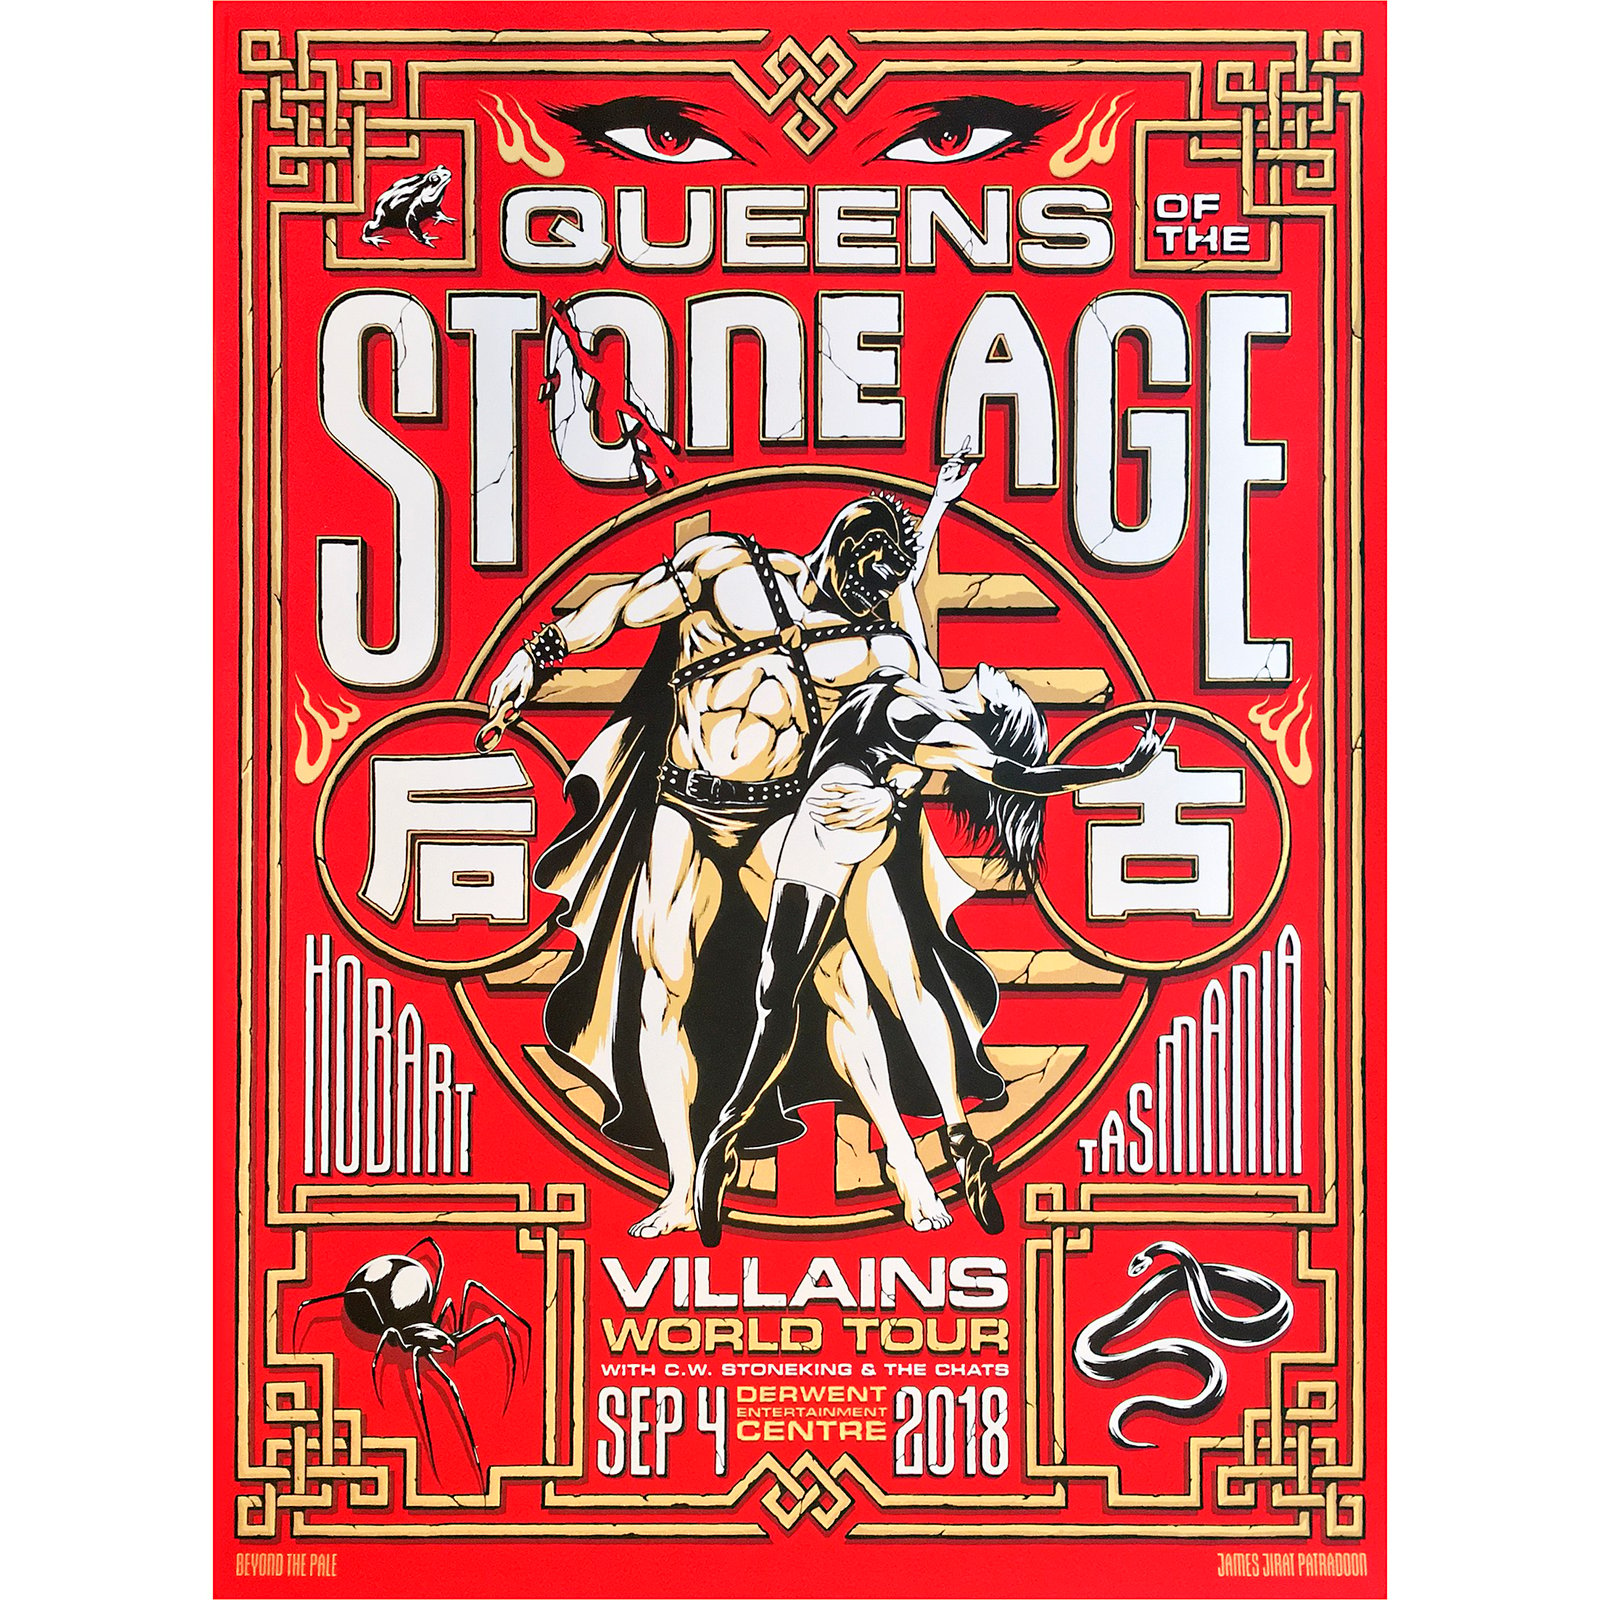 Official Queens Of The Stone Age Tour Poster / JAMES JIRAT PATRADOON STORE